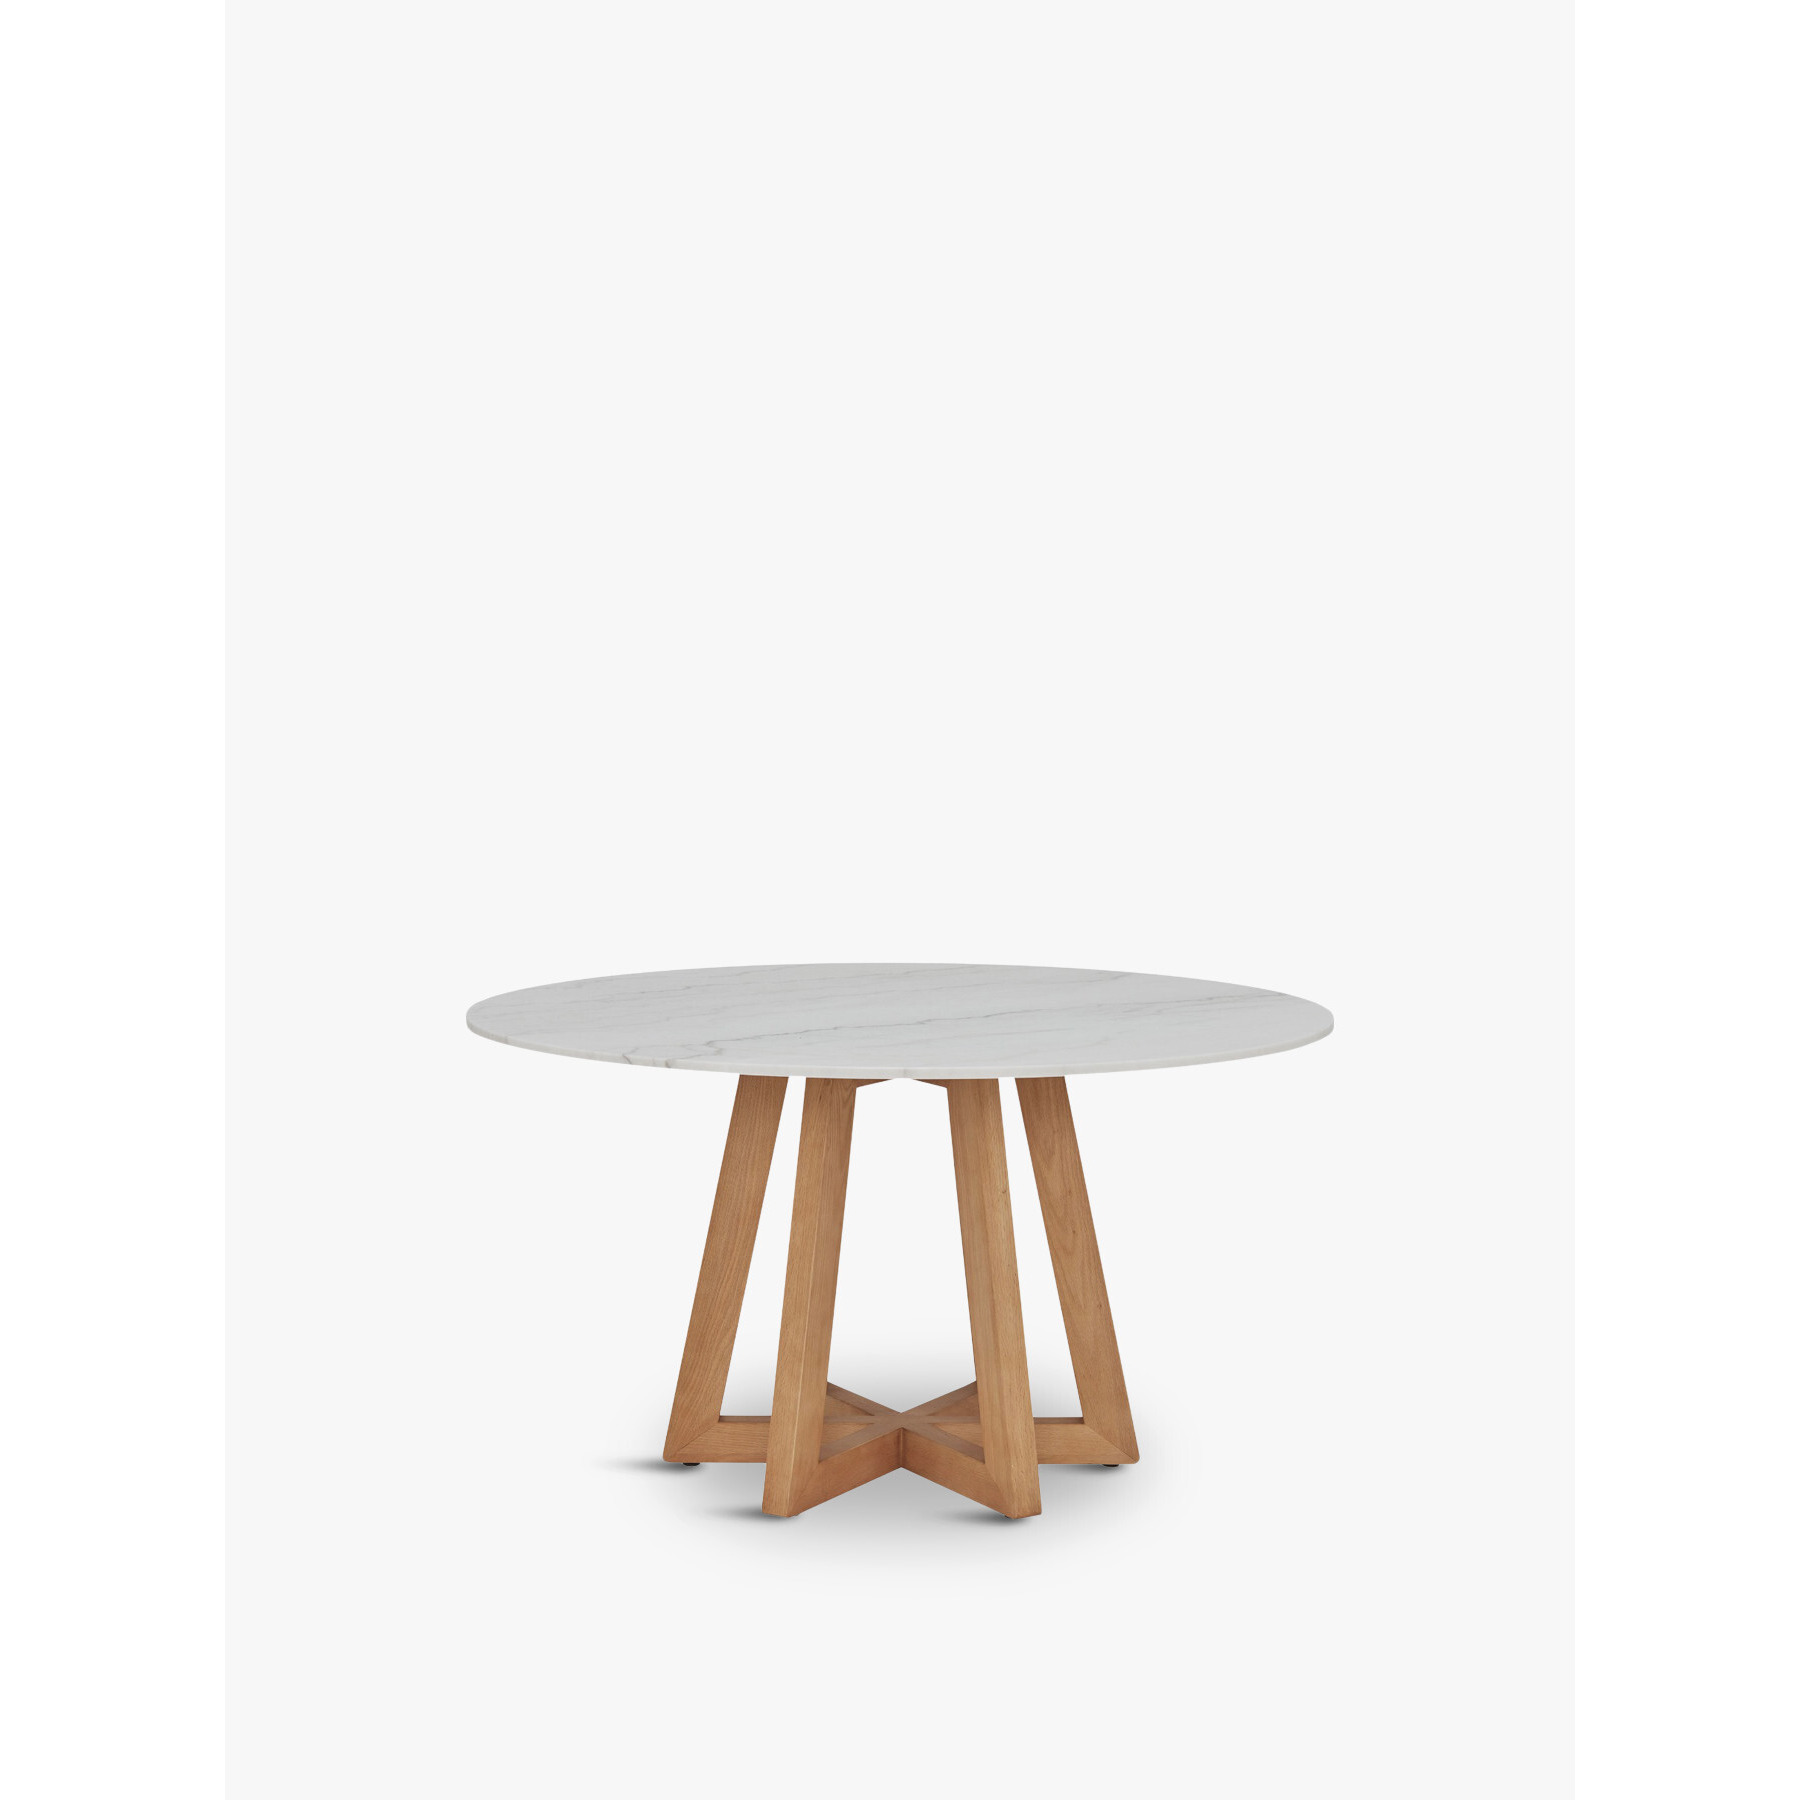 Barker and Stonehouse Shiloh Round Dining Table, White Marble - image 1